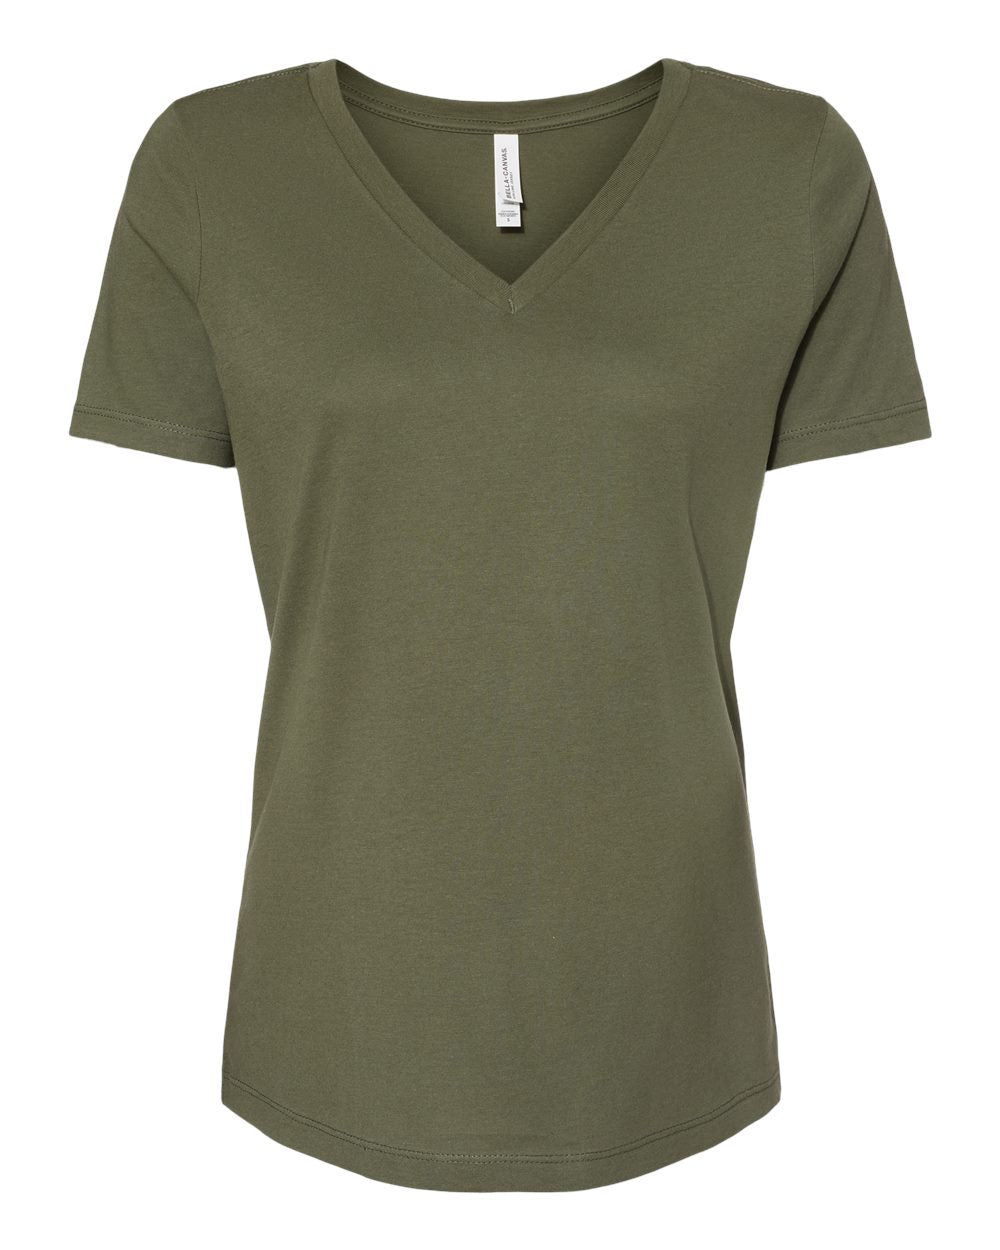 bella+canvas womens relaxed v-neck tee military green